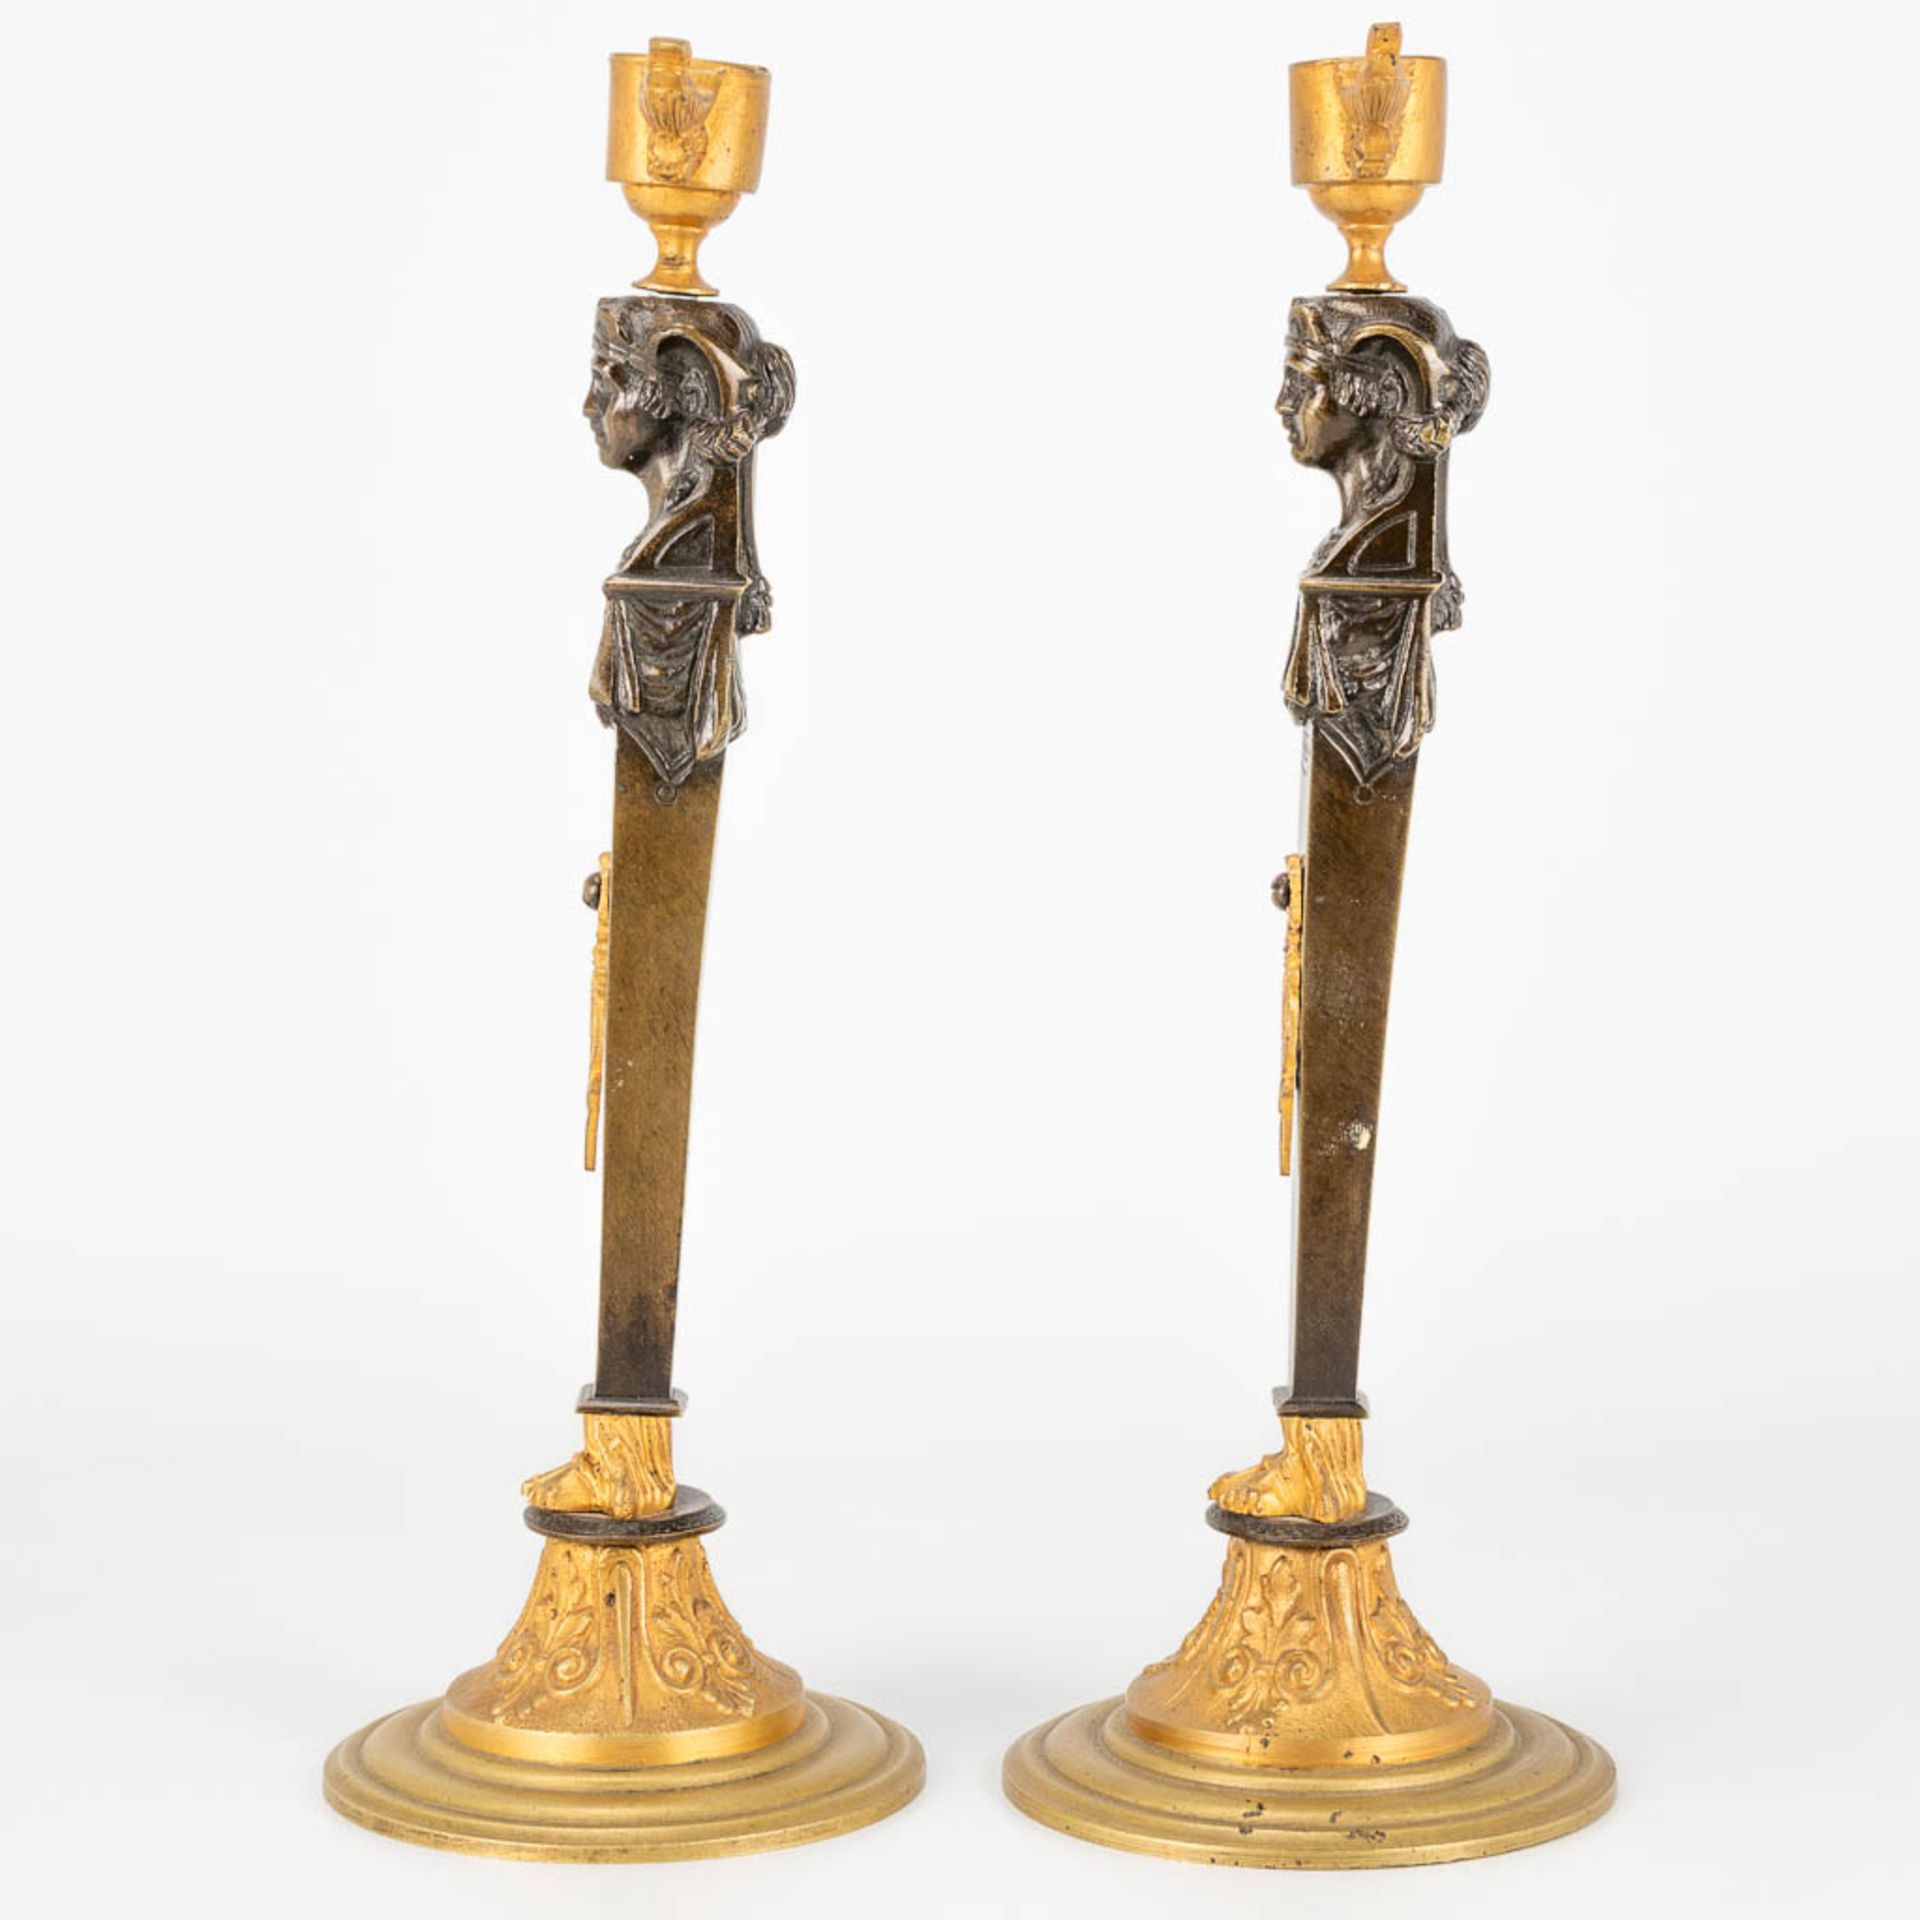 A pair of candlesticks made of gilt and patinated bronze in empire style. (27,5 x 9,5 cm) - Image 2 of 15